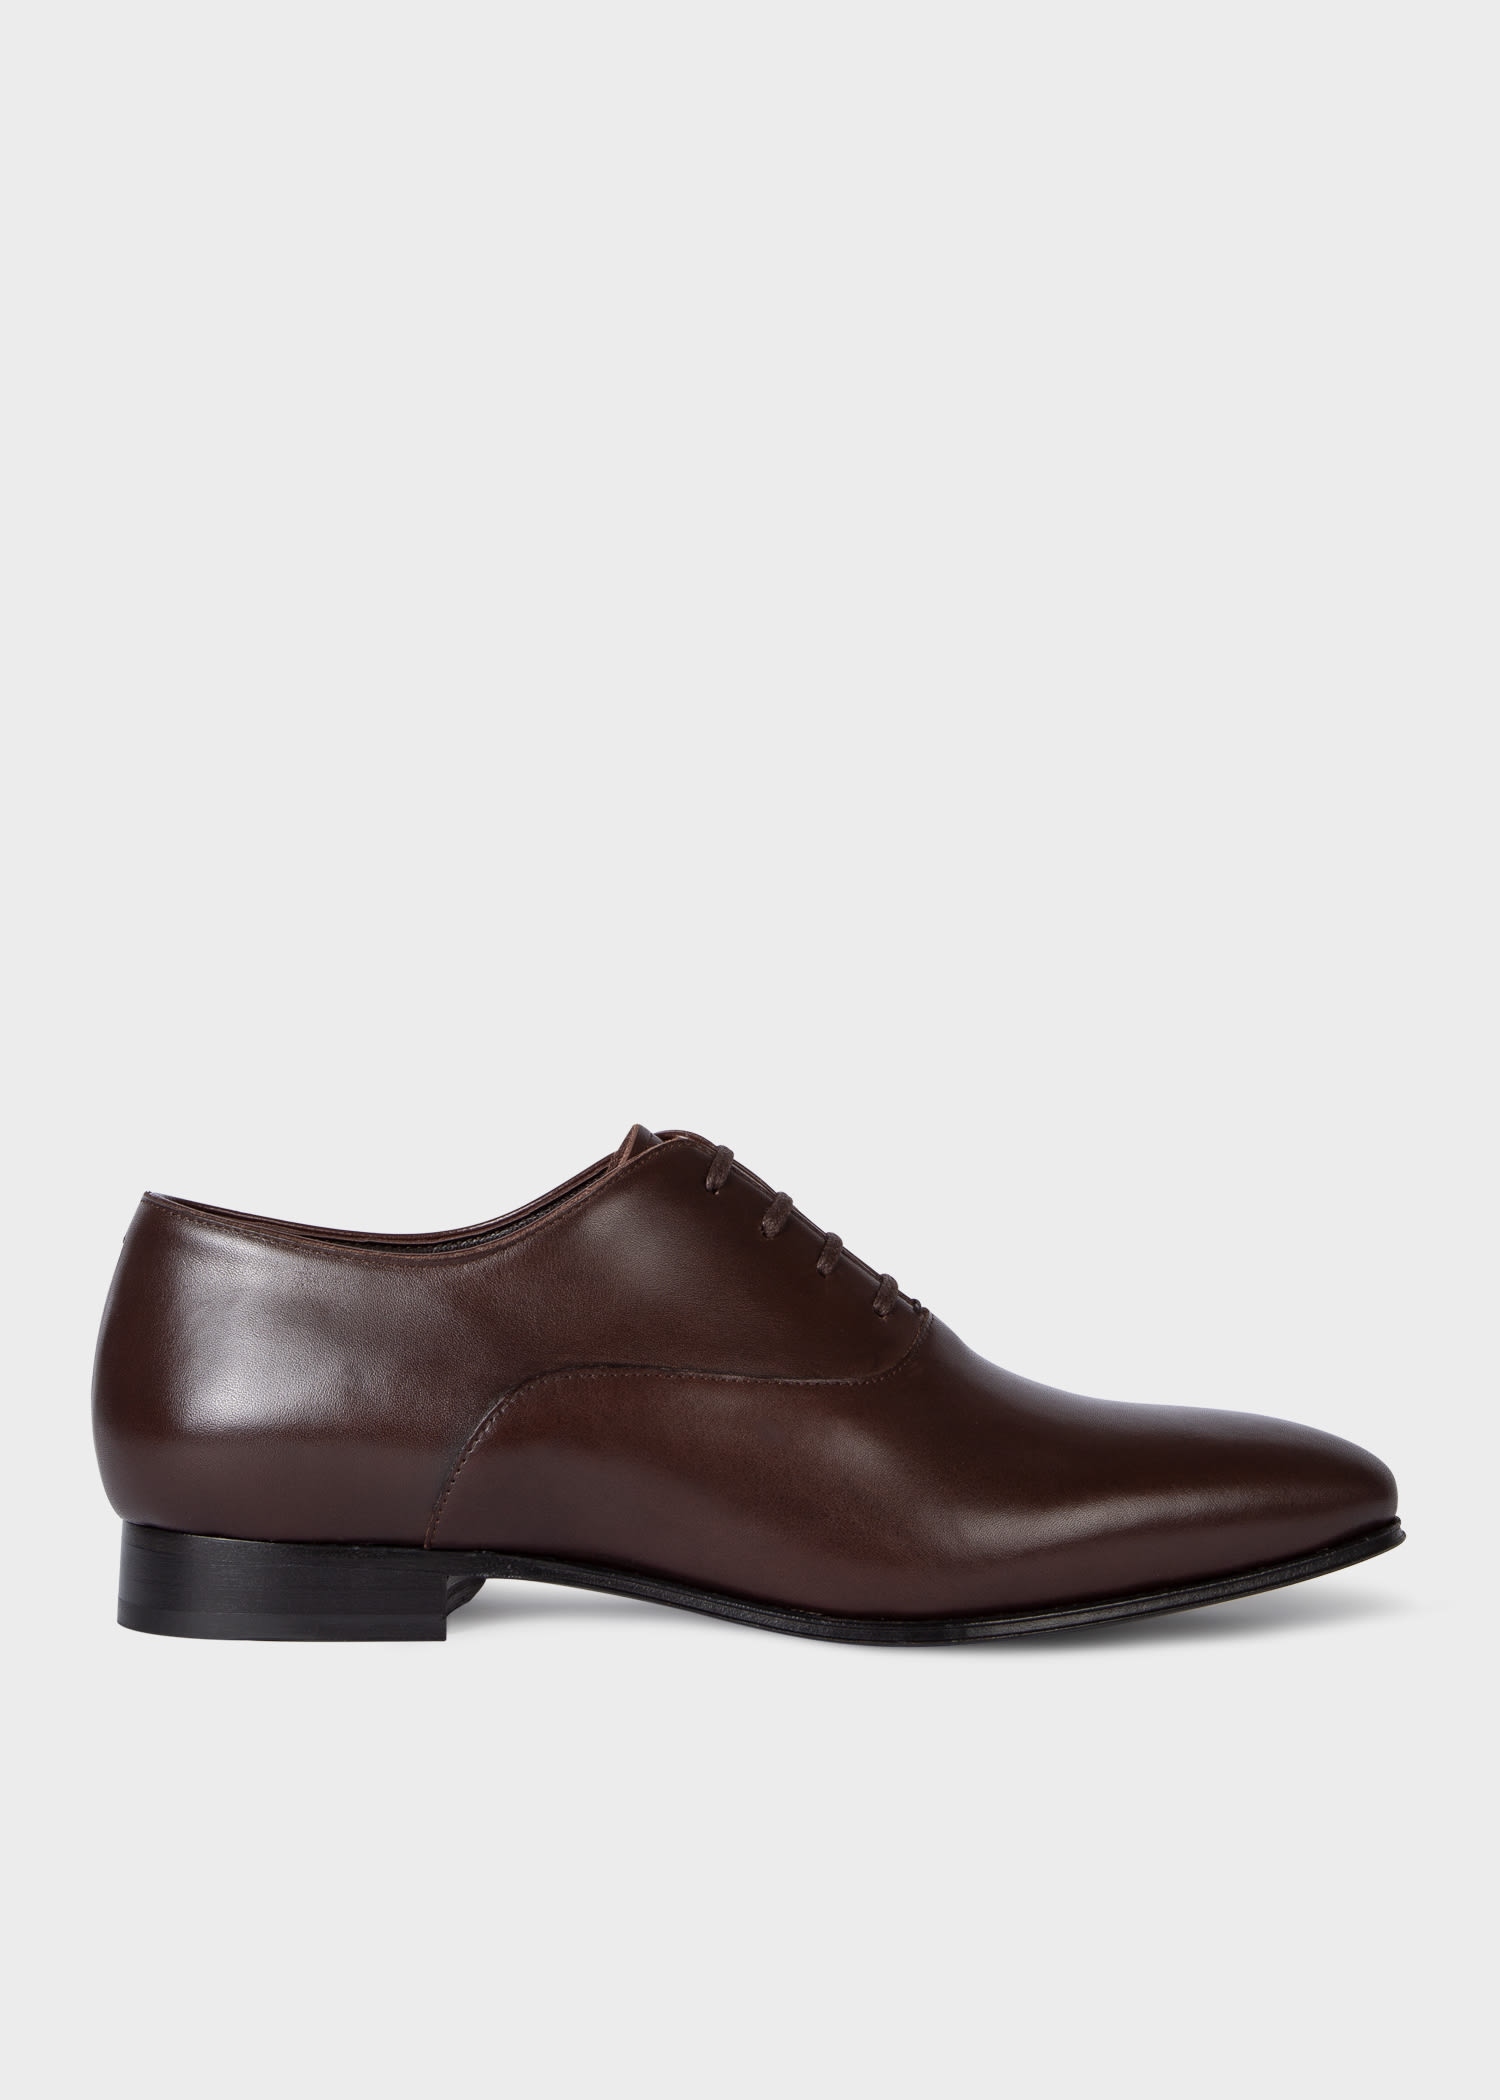 Men's Designer Shoes | Casual, Formal & Slip-On Shoes - Paul Smith